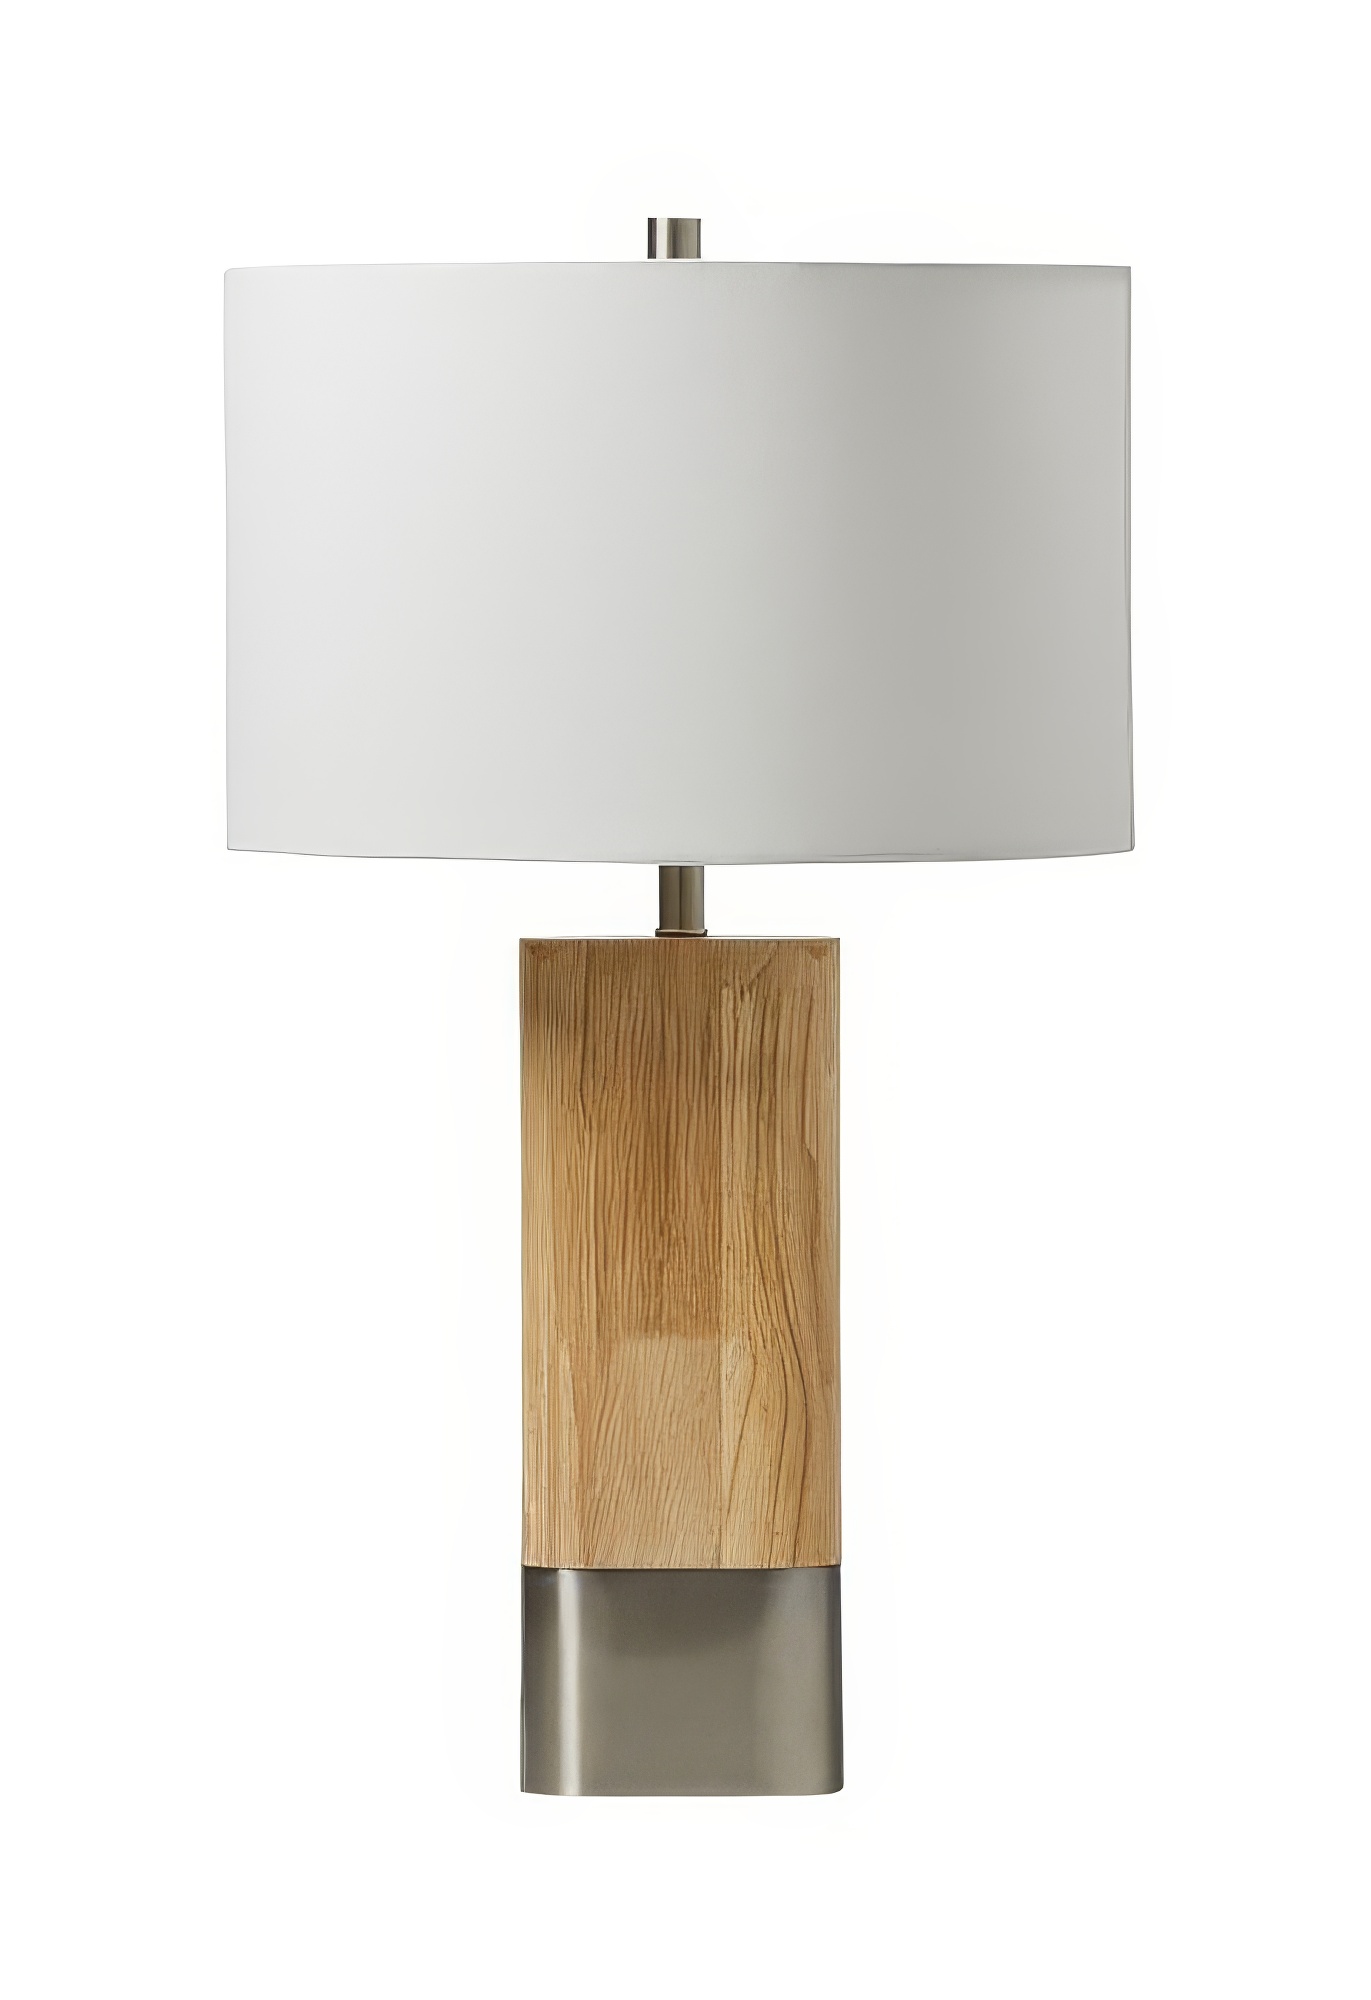 Craftmade 86246 1 Light Wood/Metal Base Table Lamp w/ USB in Brushed Polished Nickel